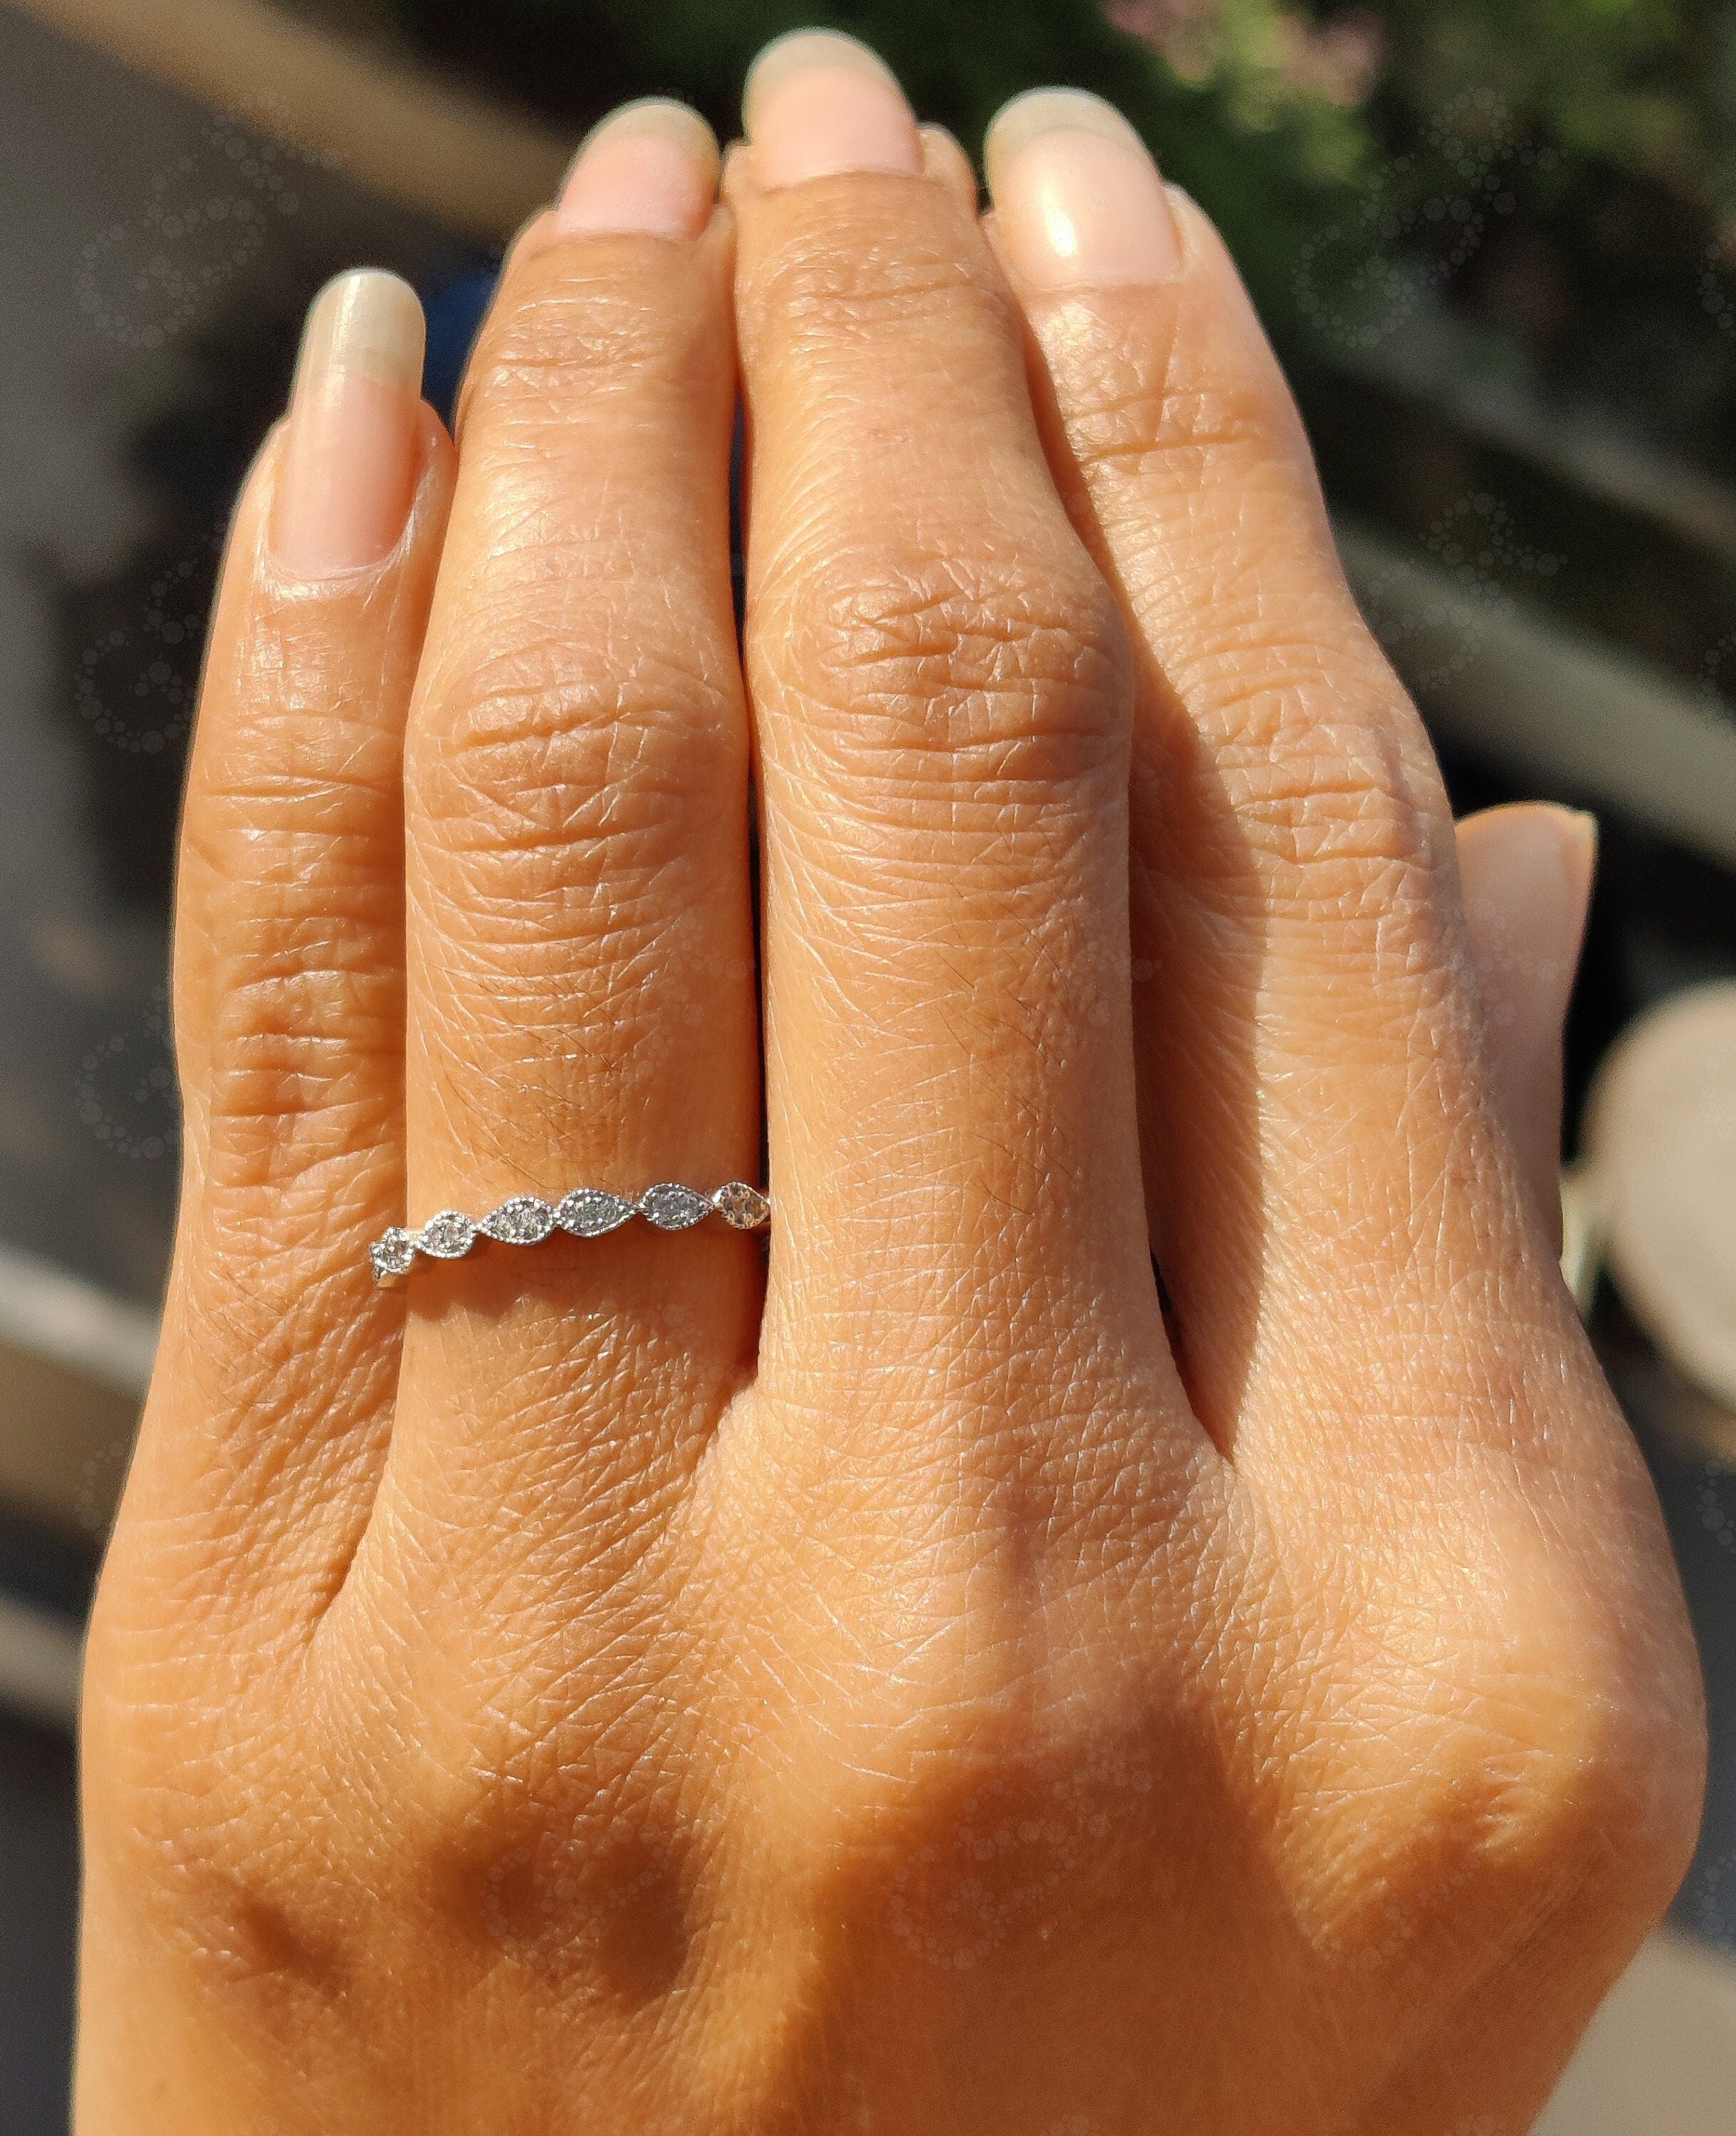 Vintage Stacking Ring in Silver and Gold: Moissanite Wedding Band with Pear Shape Design, Perfect for Anniversaries and Nature-Inspired Elegance